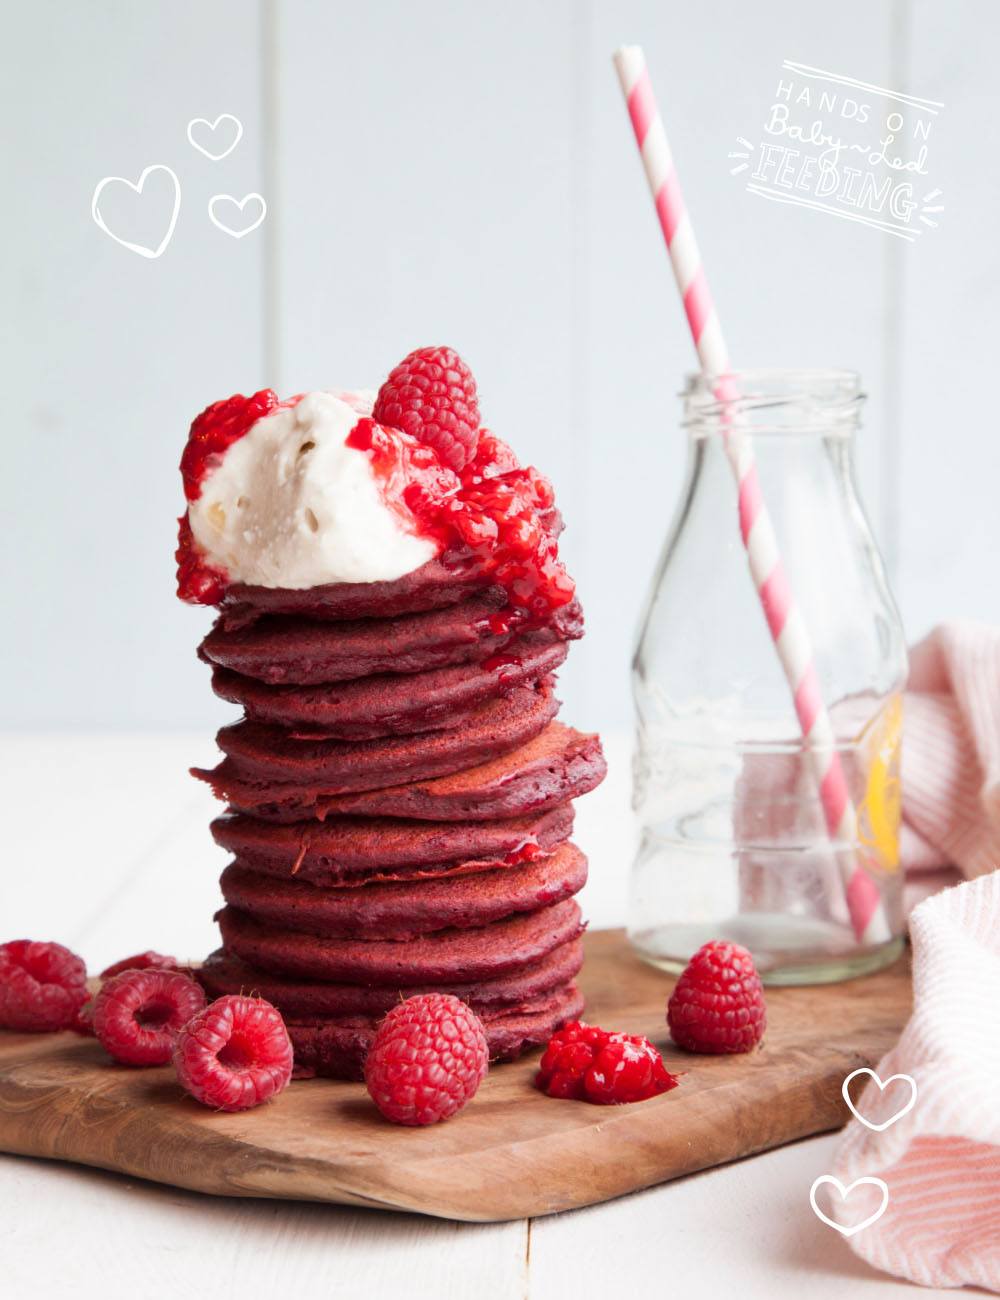 A yummy and really healthy pancake recipe for baby led weaning. These pancakes are full of yummy goodness and taste like chocolate! Packed with nutrients and goodness beetroot pancakes for blw recipe. Lunch ideas for baby led weaning, treats for blw. 